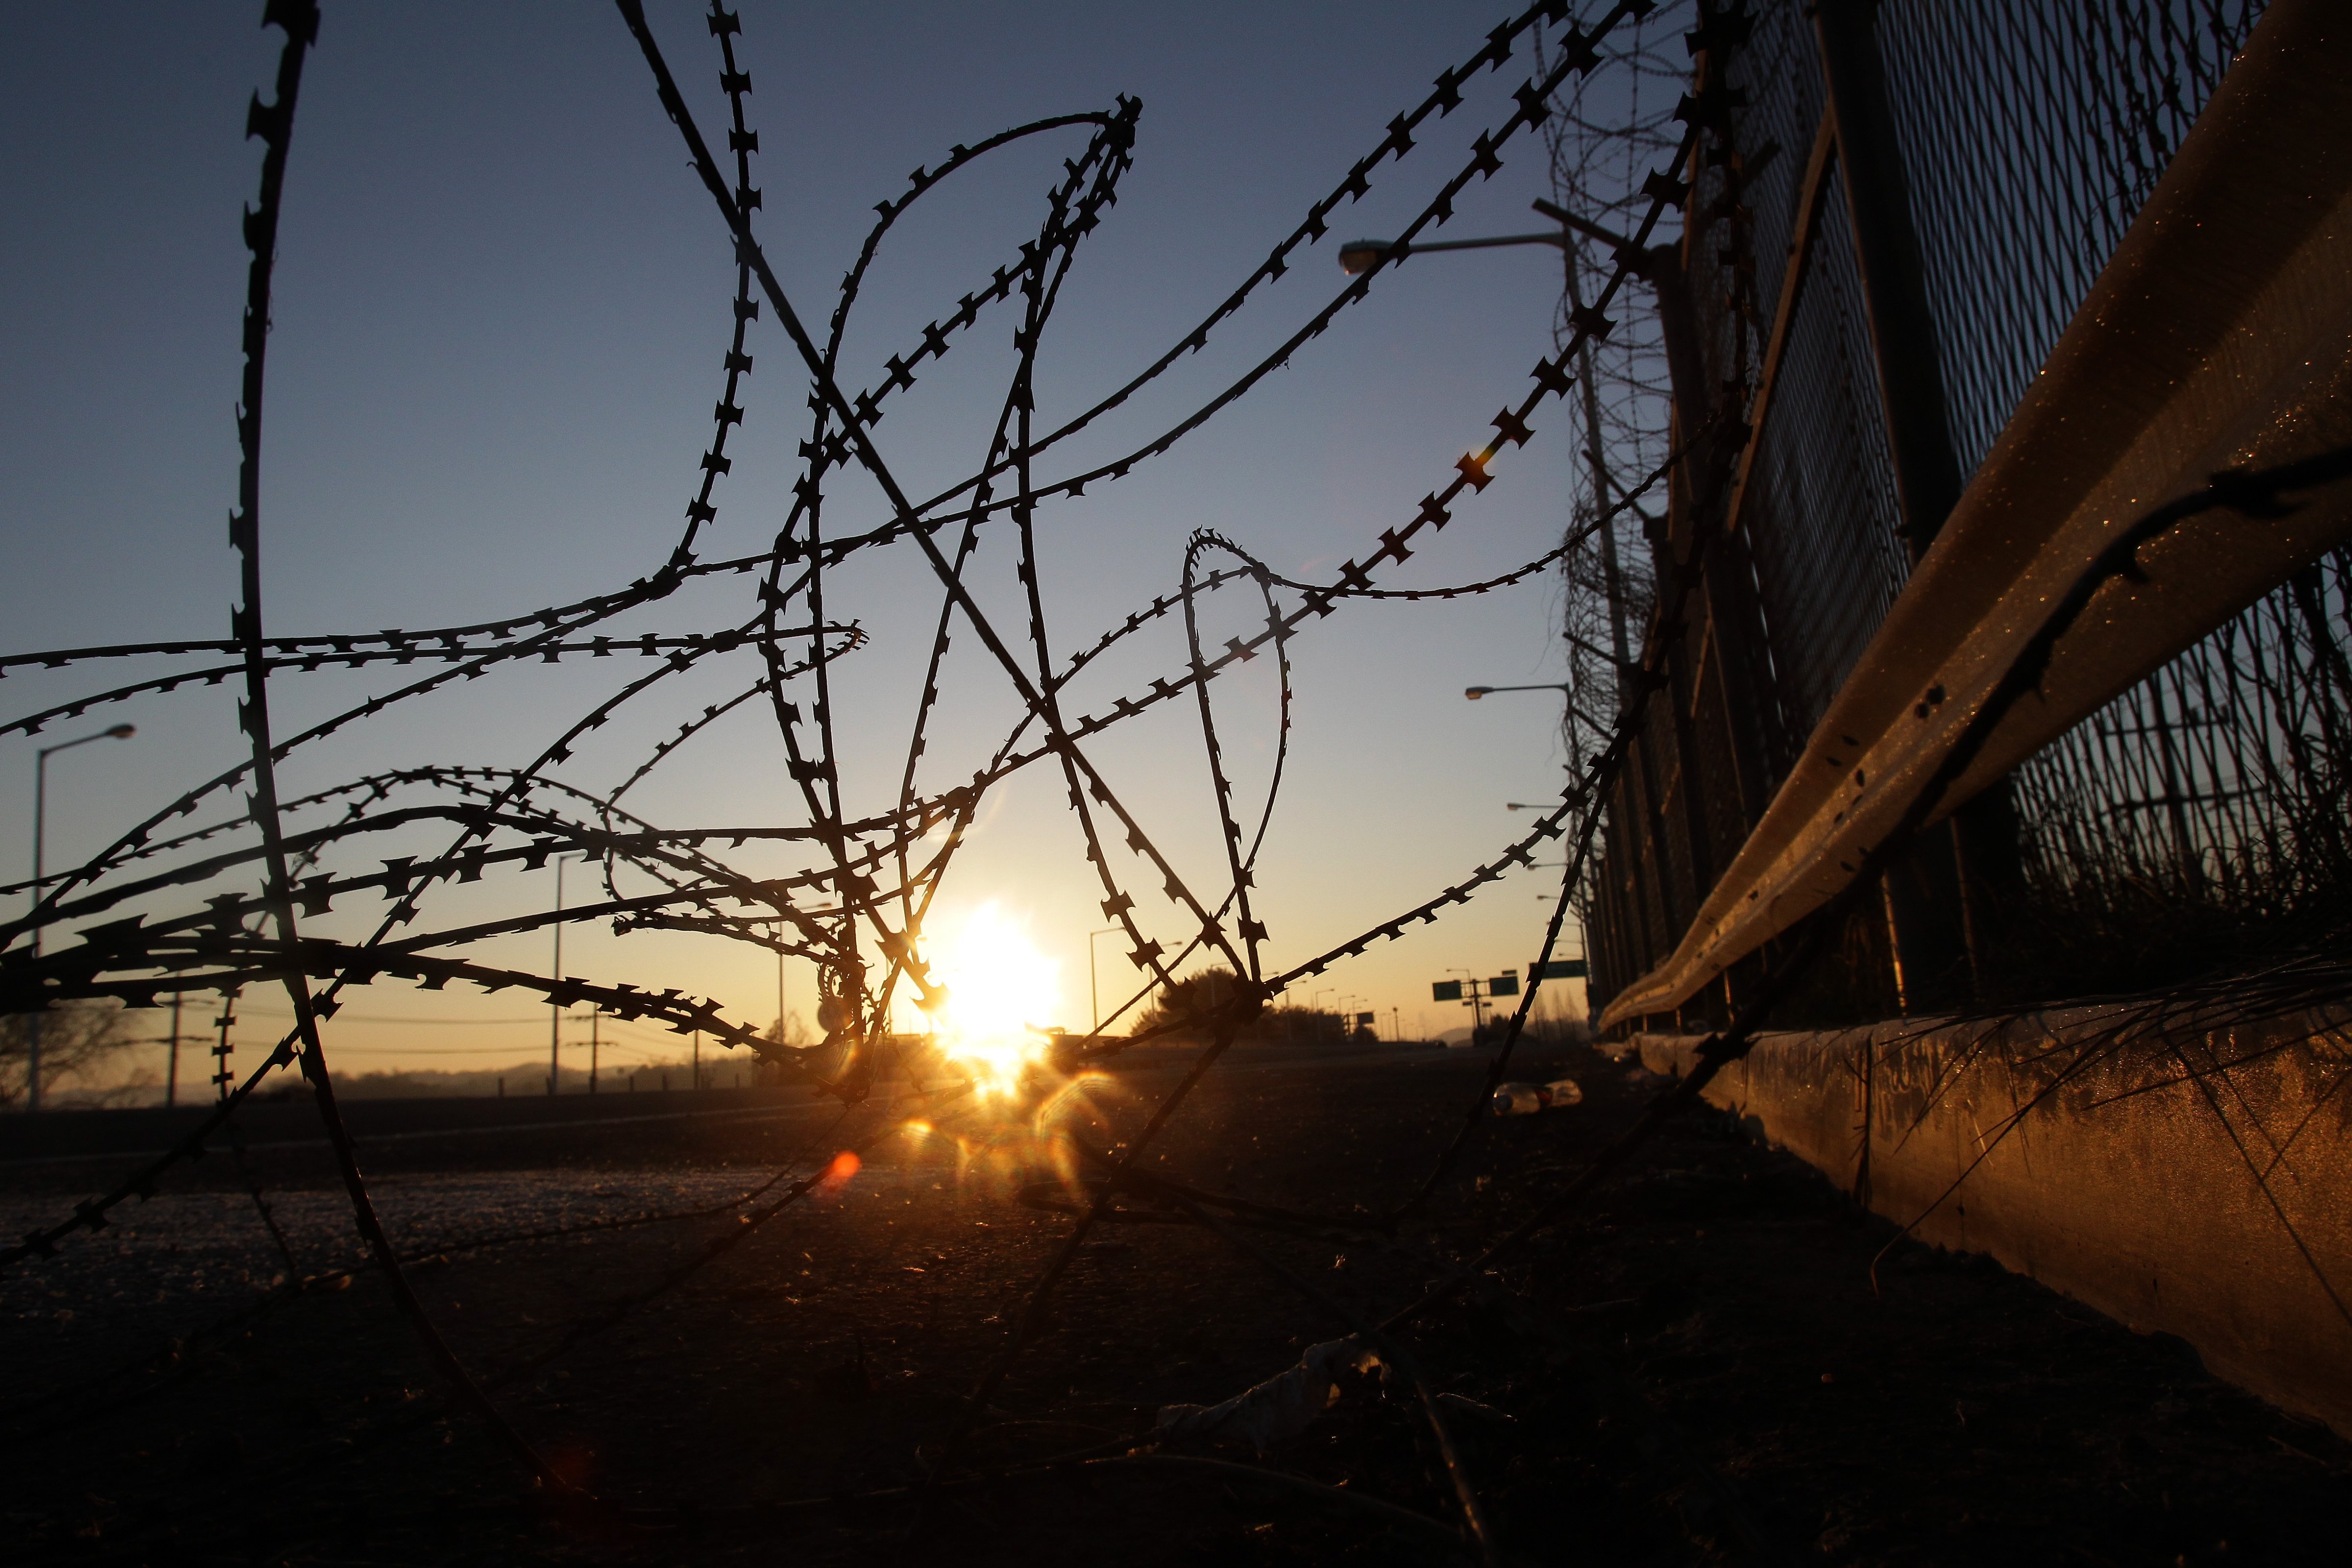 A sunrise is seen through a barbed-wire fence at the Imjingak, near the Demilitarized zone separating South and North Korea in Paju, South Korea, on Jan. 8, 2016. (Chung Sung-Jun—Getty Images)